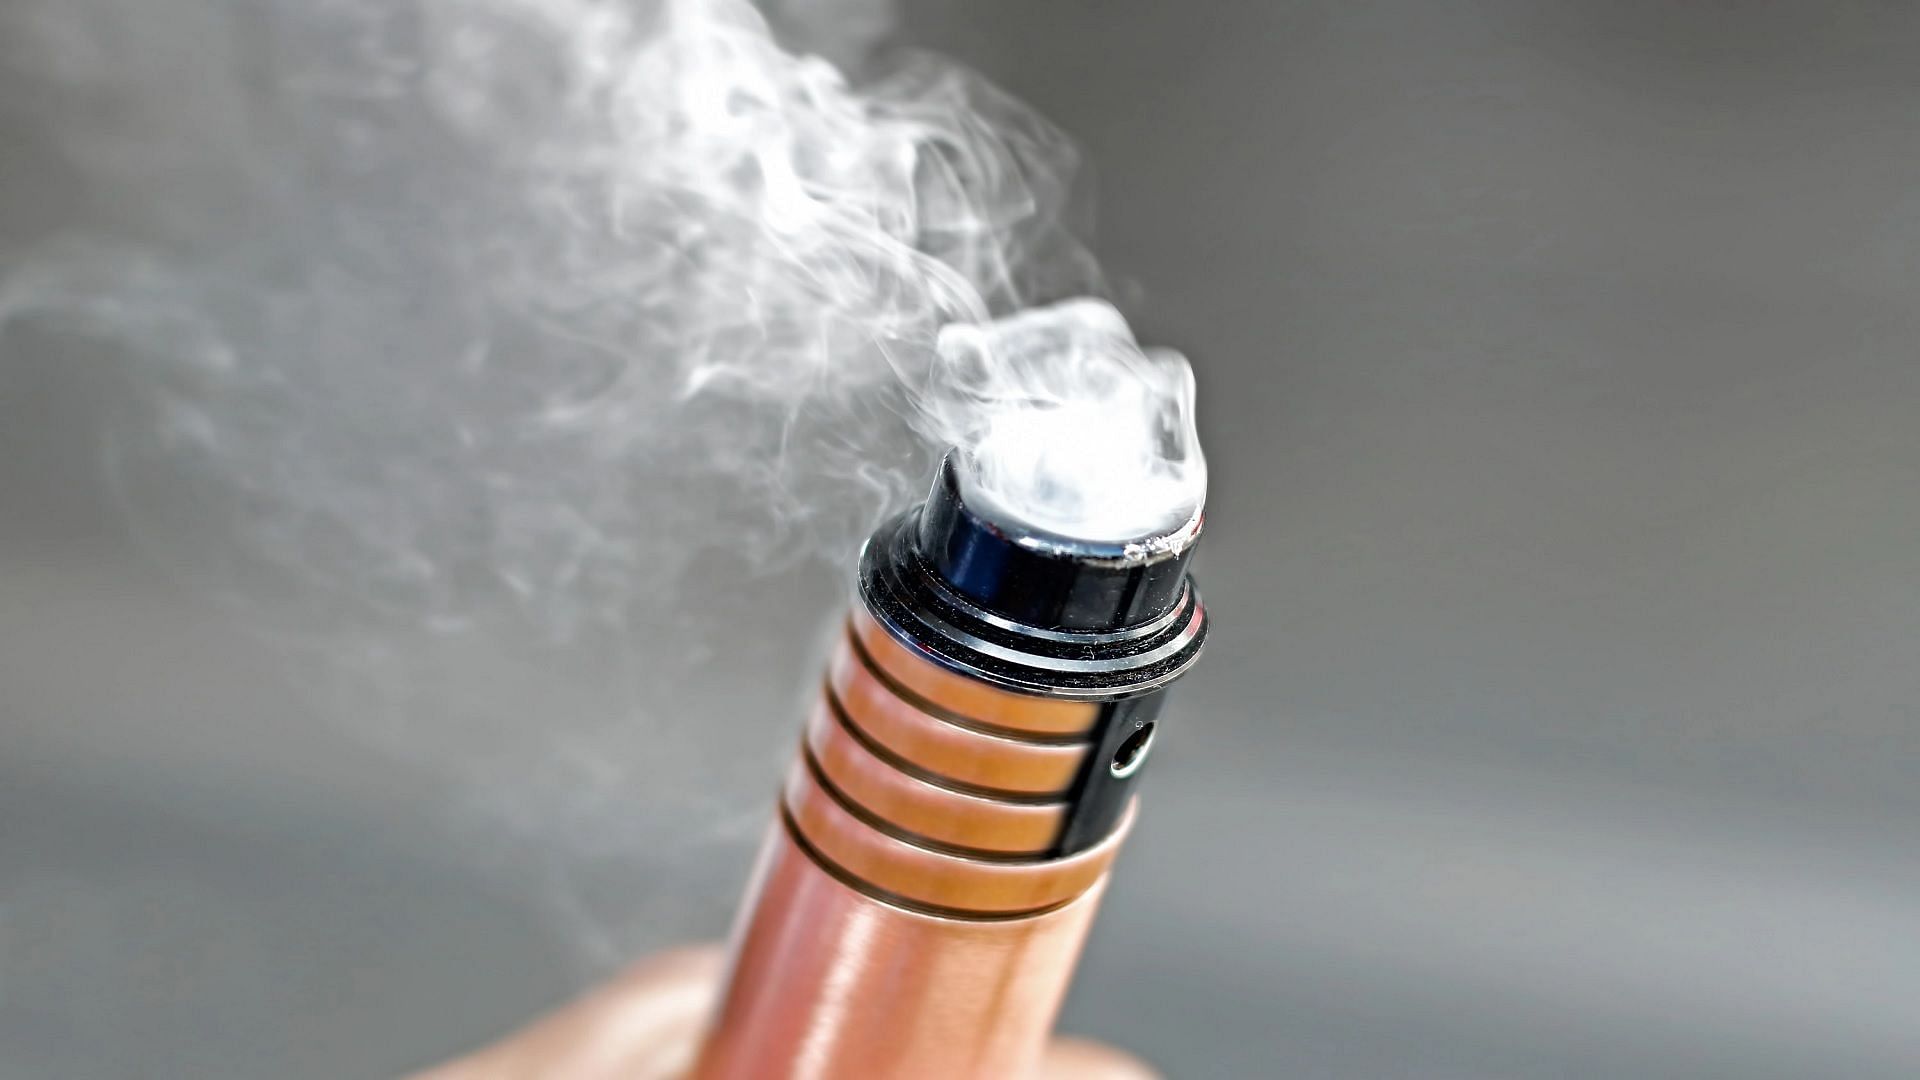 Annie Donovan giving vape to baby leaves netizens enraged (Image via Getty Images)